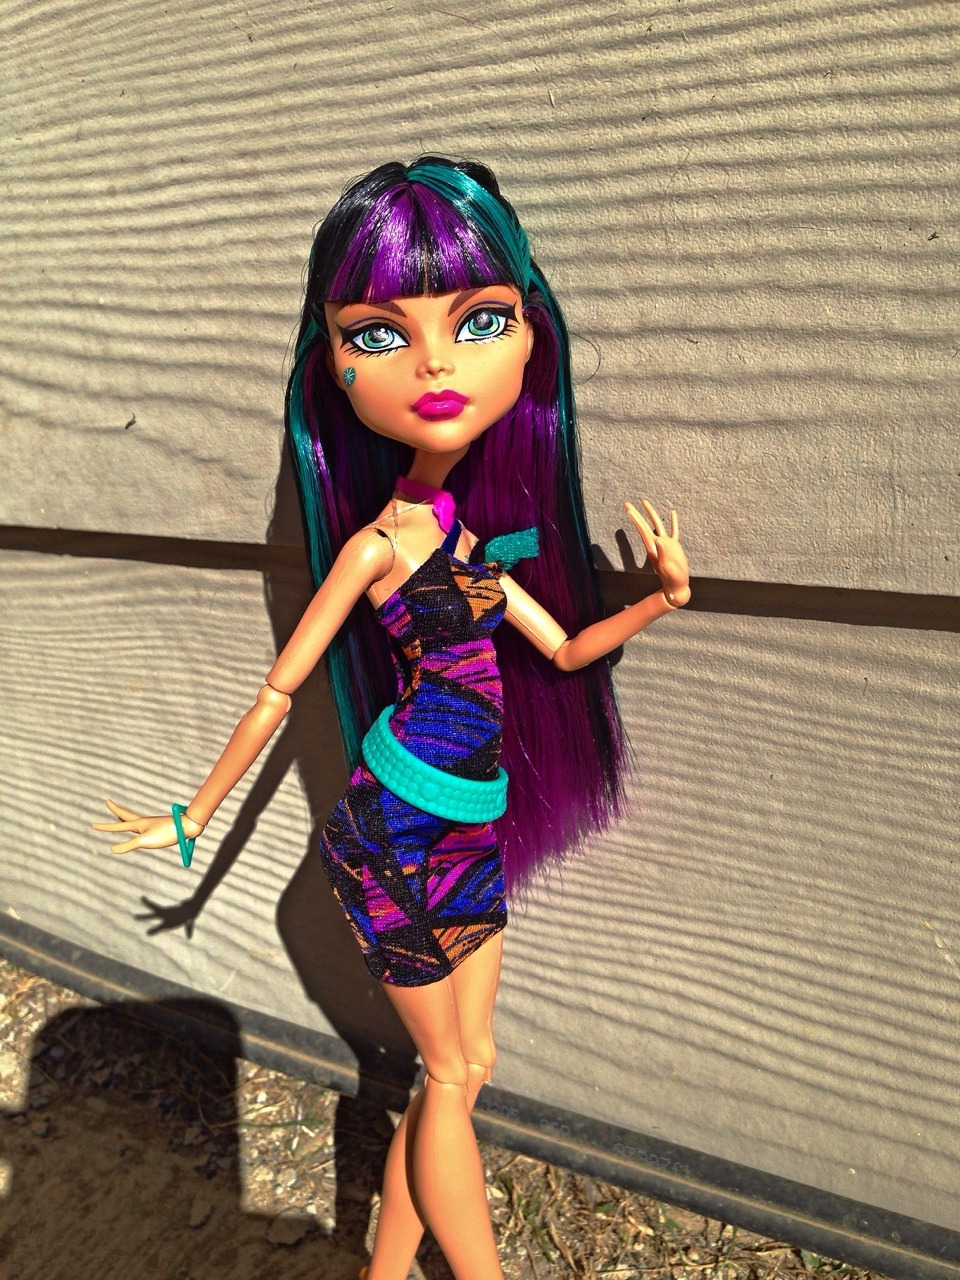 themonstercrafts:

asumacrazy:

Creepateria Cleo is simply Goregeous.
Teal and purple work rather well on this lovely lady .
Soaking up that Colorado sun.

O my ghoul, I need this Cleo so badly
